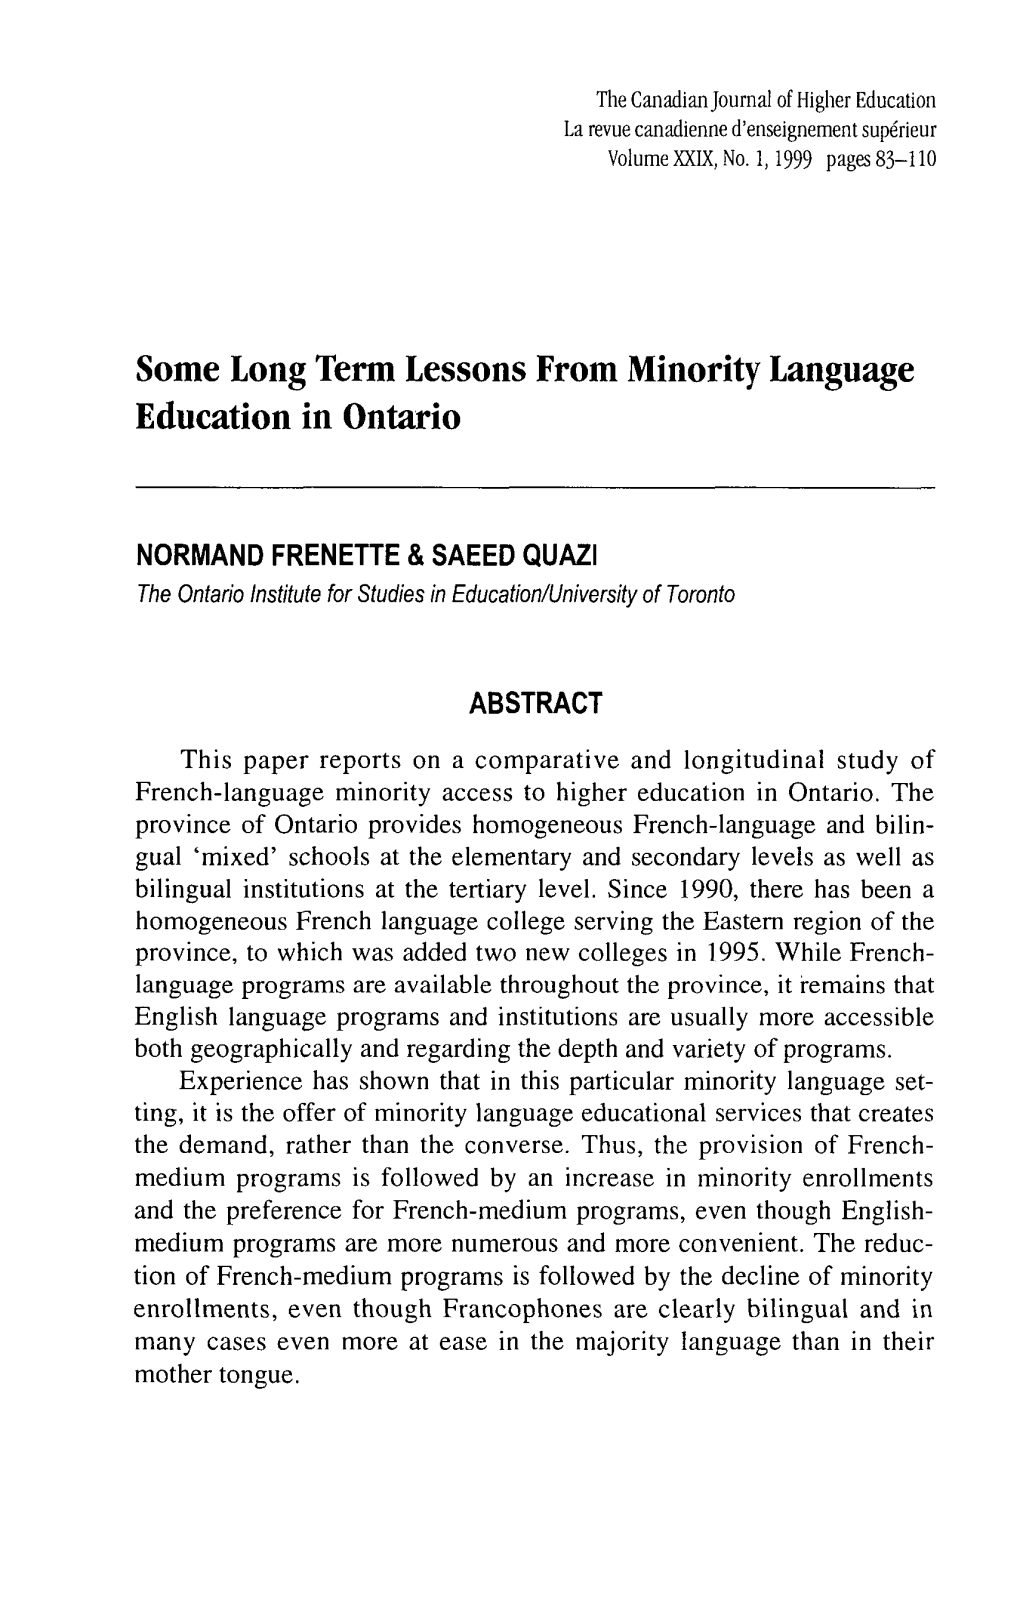 Some Long Term Lessons from Minority Language Education in Ontario